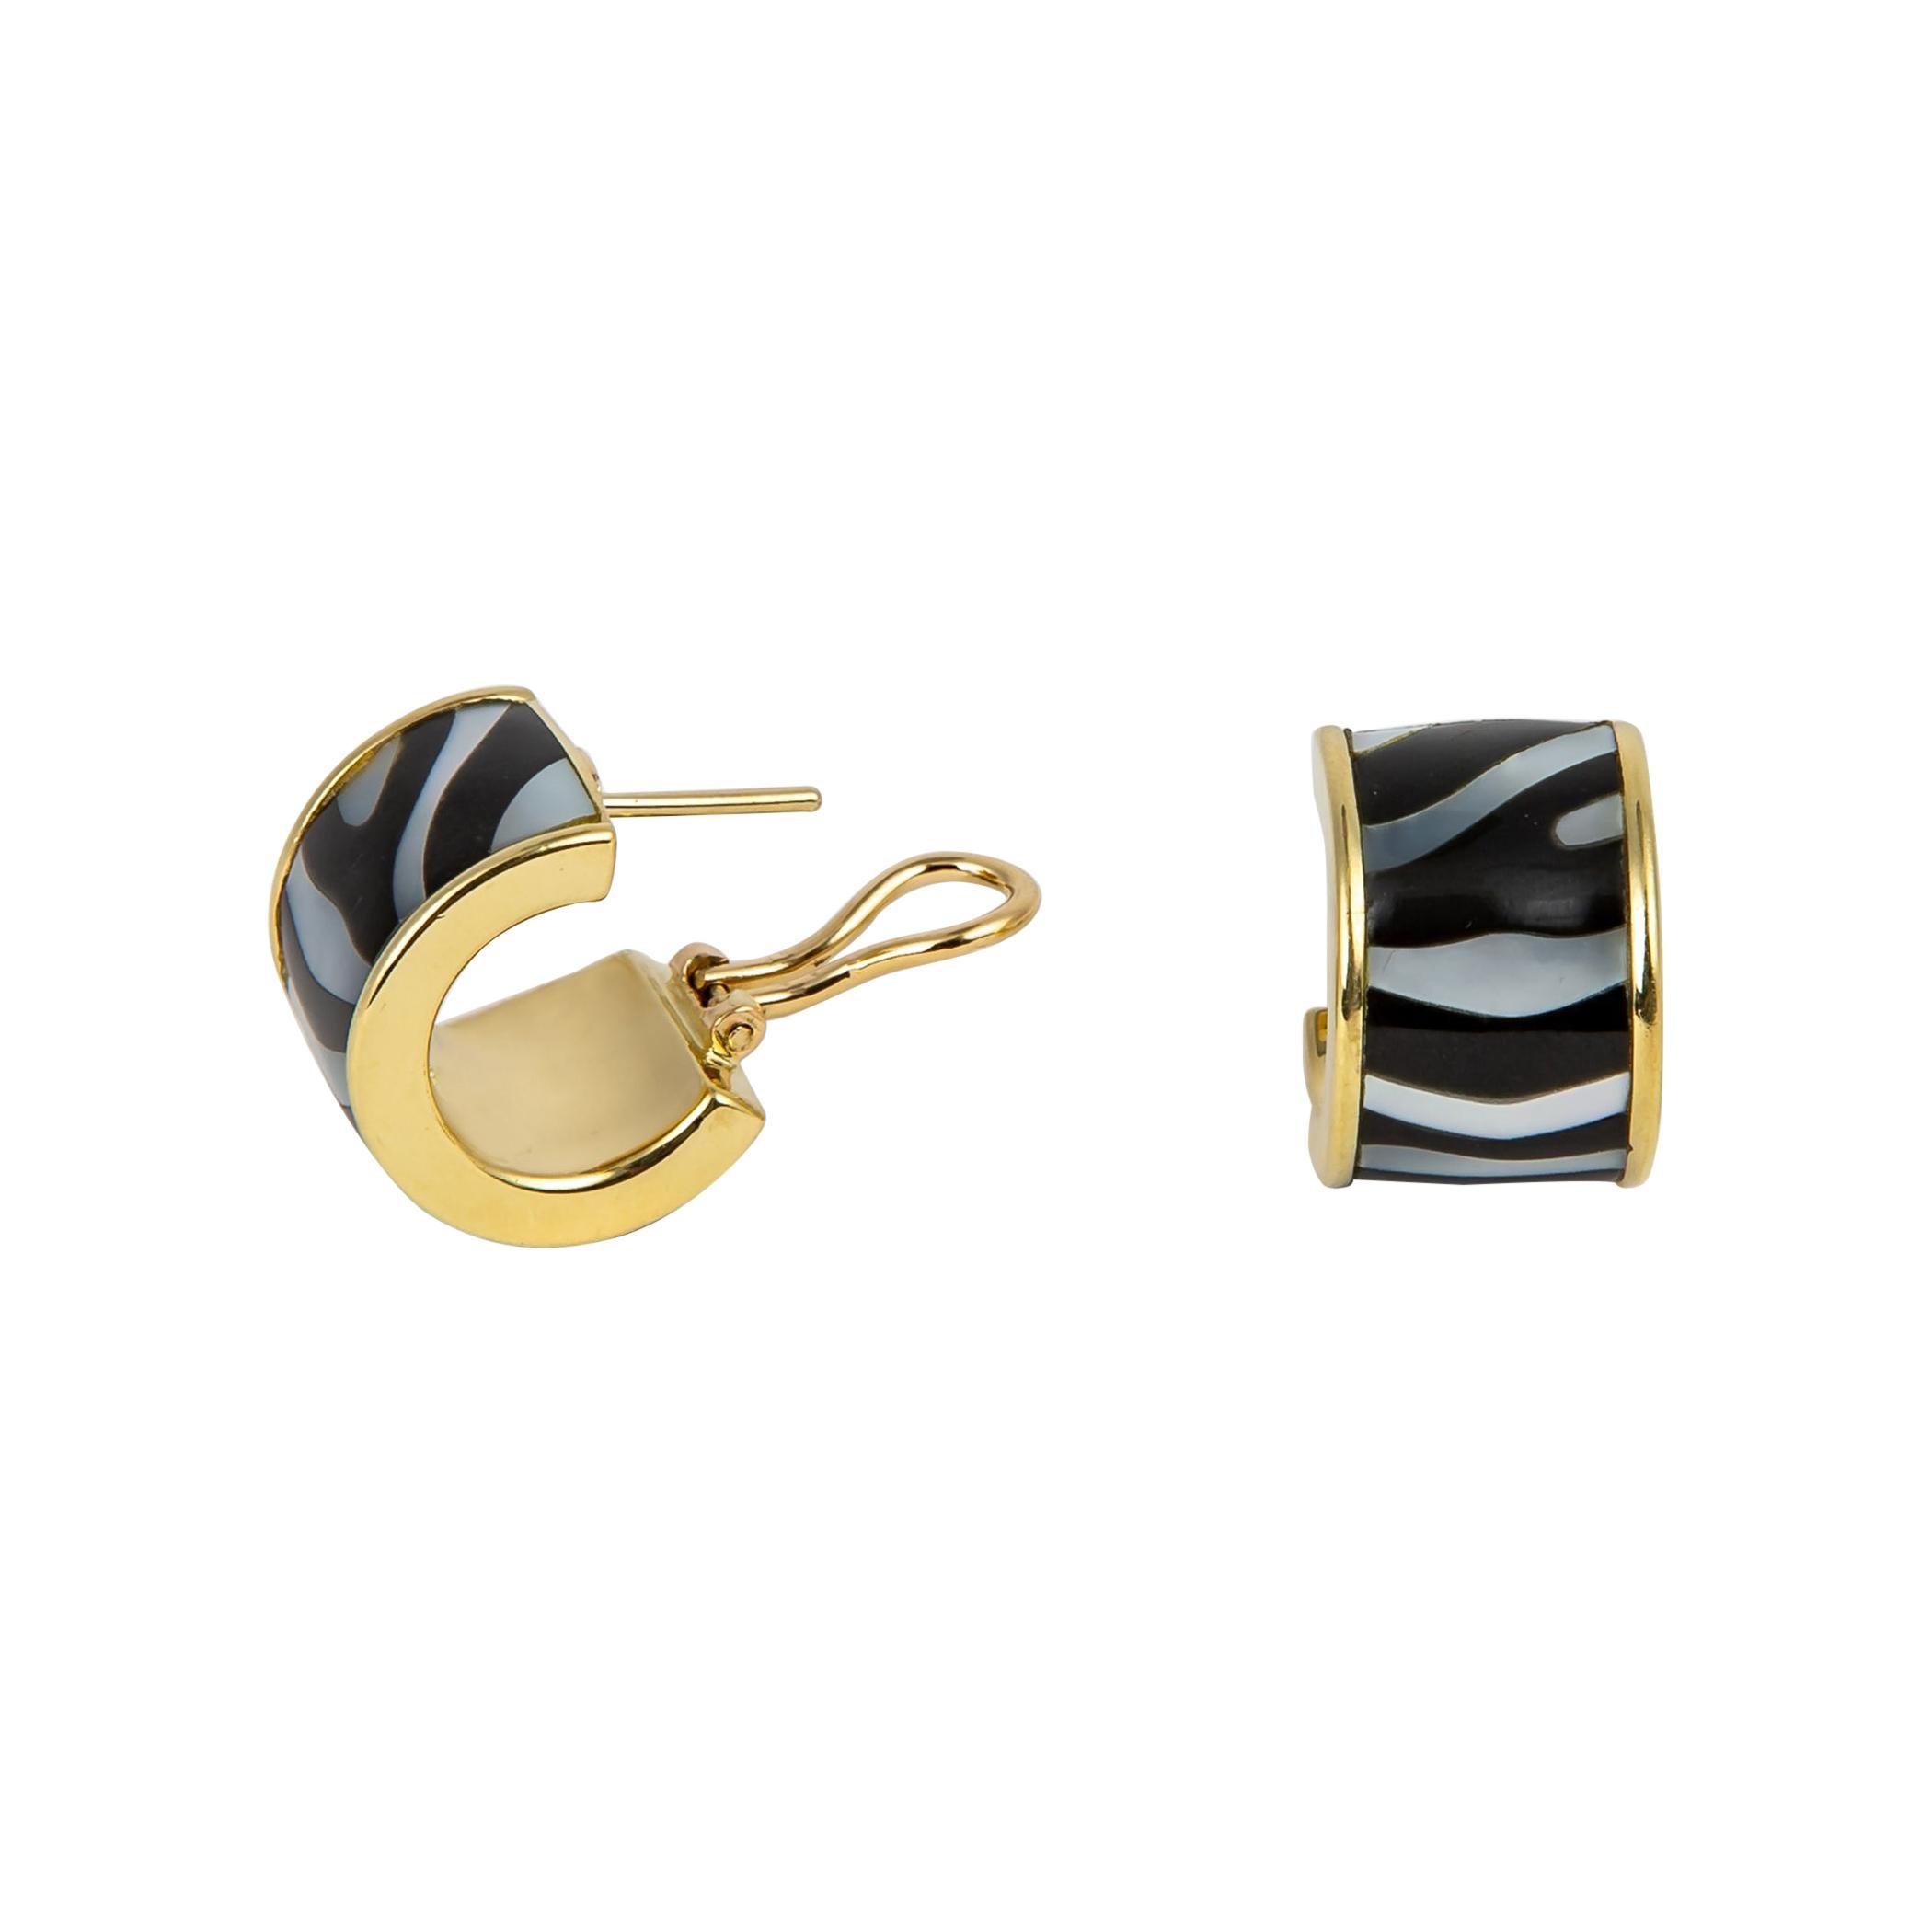 Tiffany & Co. Black Jade and Mother of Pearl Earrings